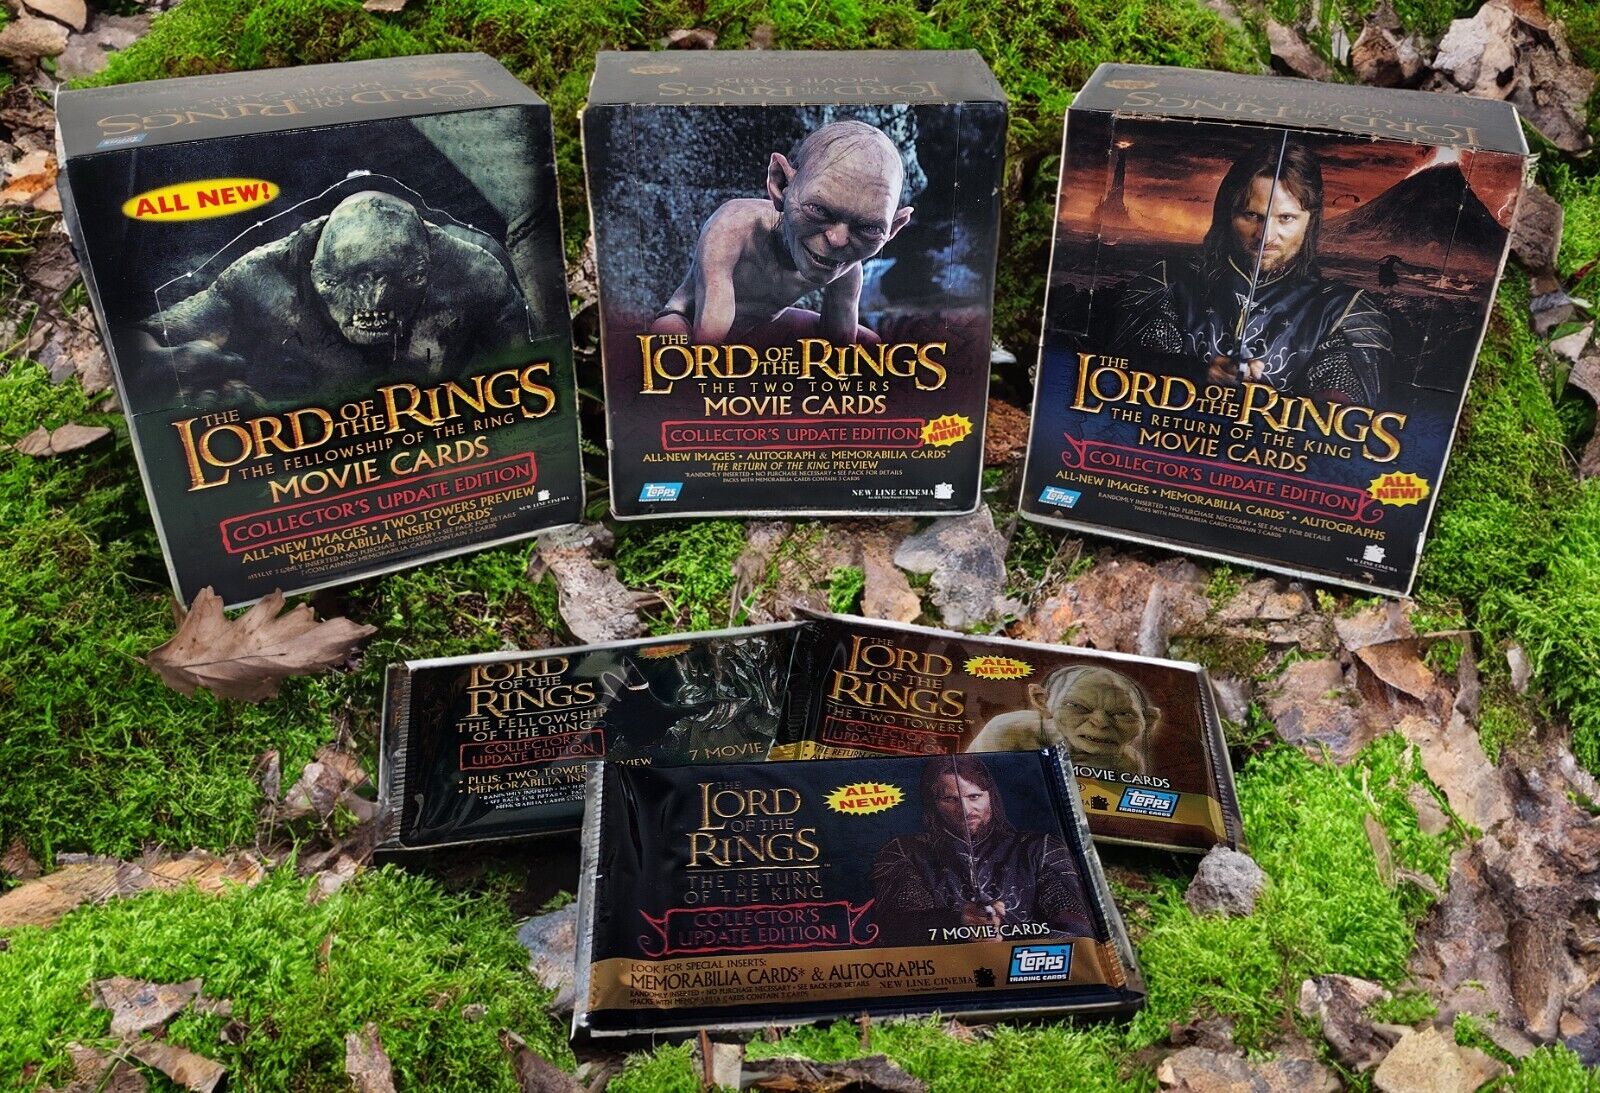 Middle-earth Magic: (3) Lord of the Rings Packs, Chance at Autograph/Memorabilia